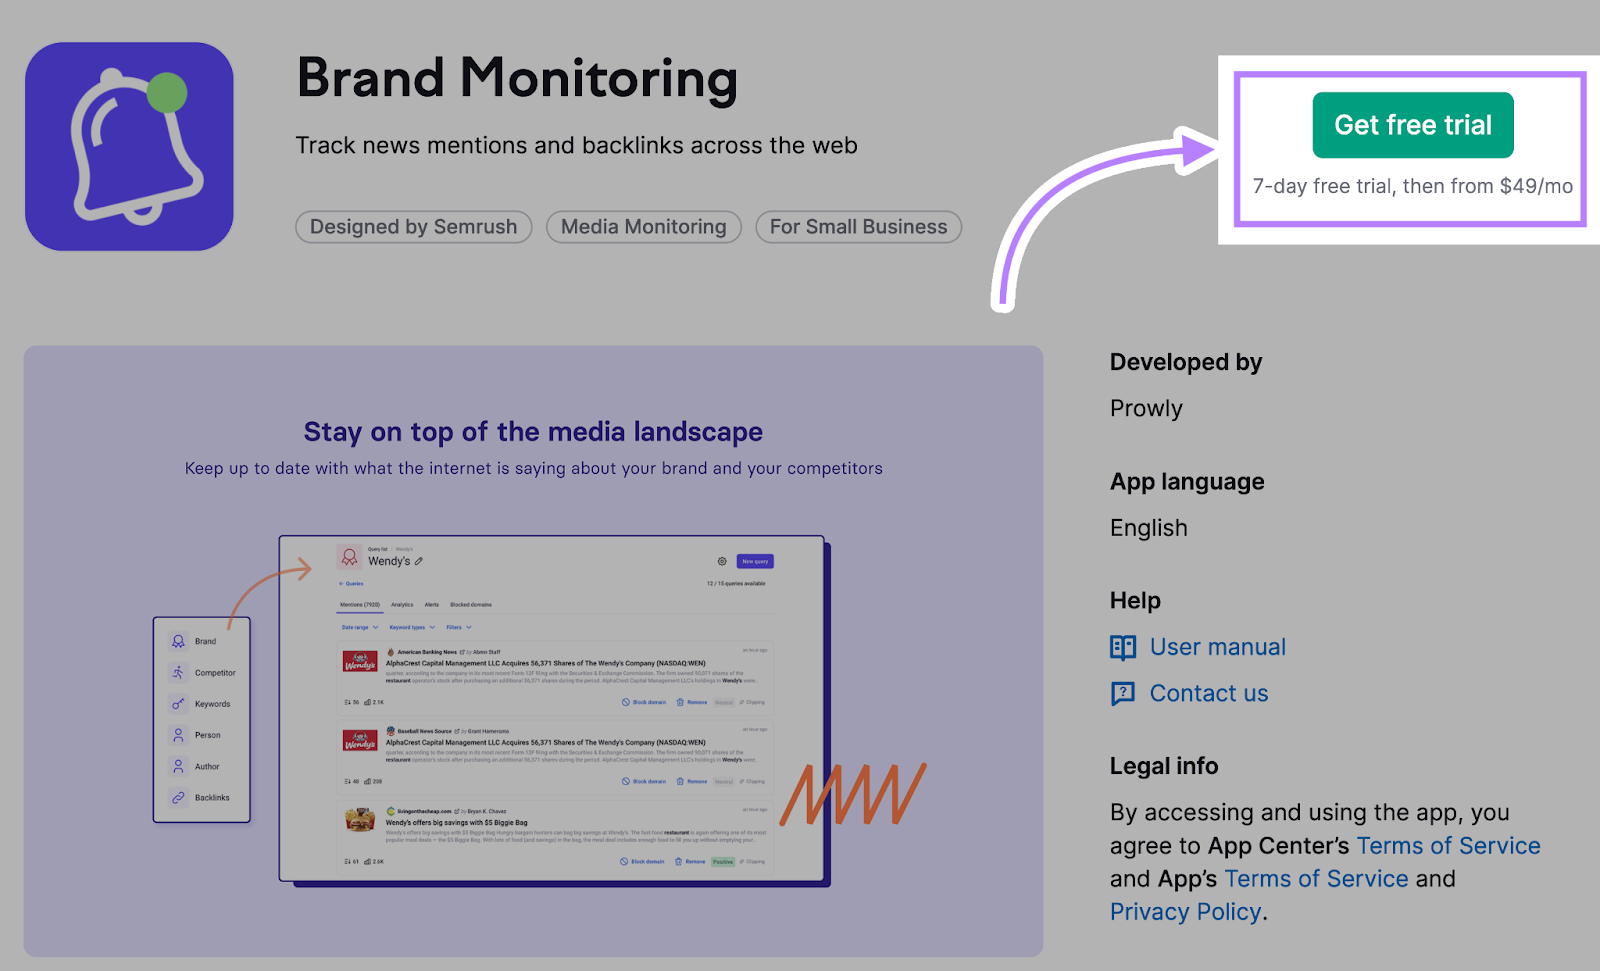 Get free trial for Brand Monitoring tool